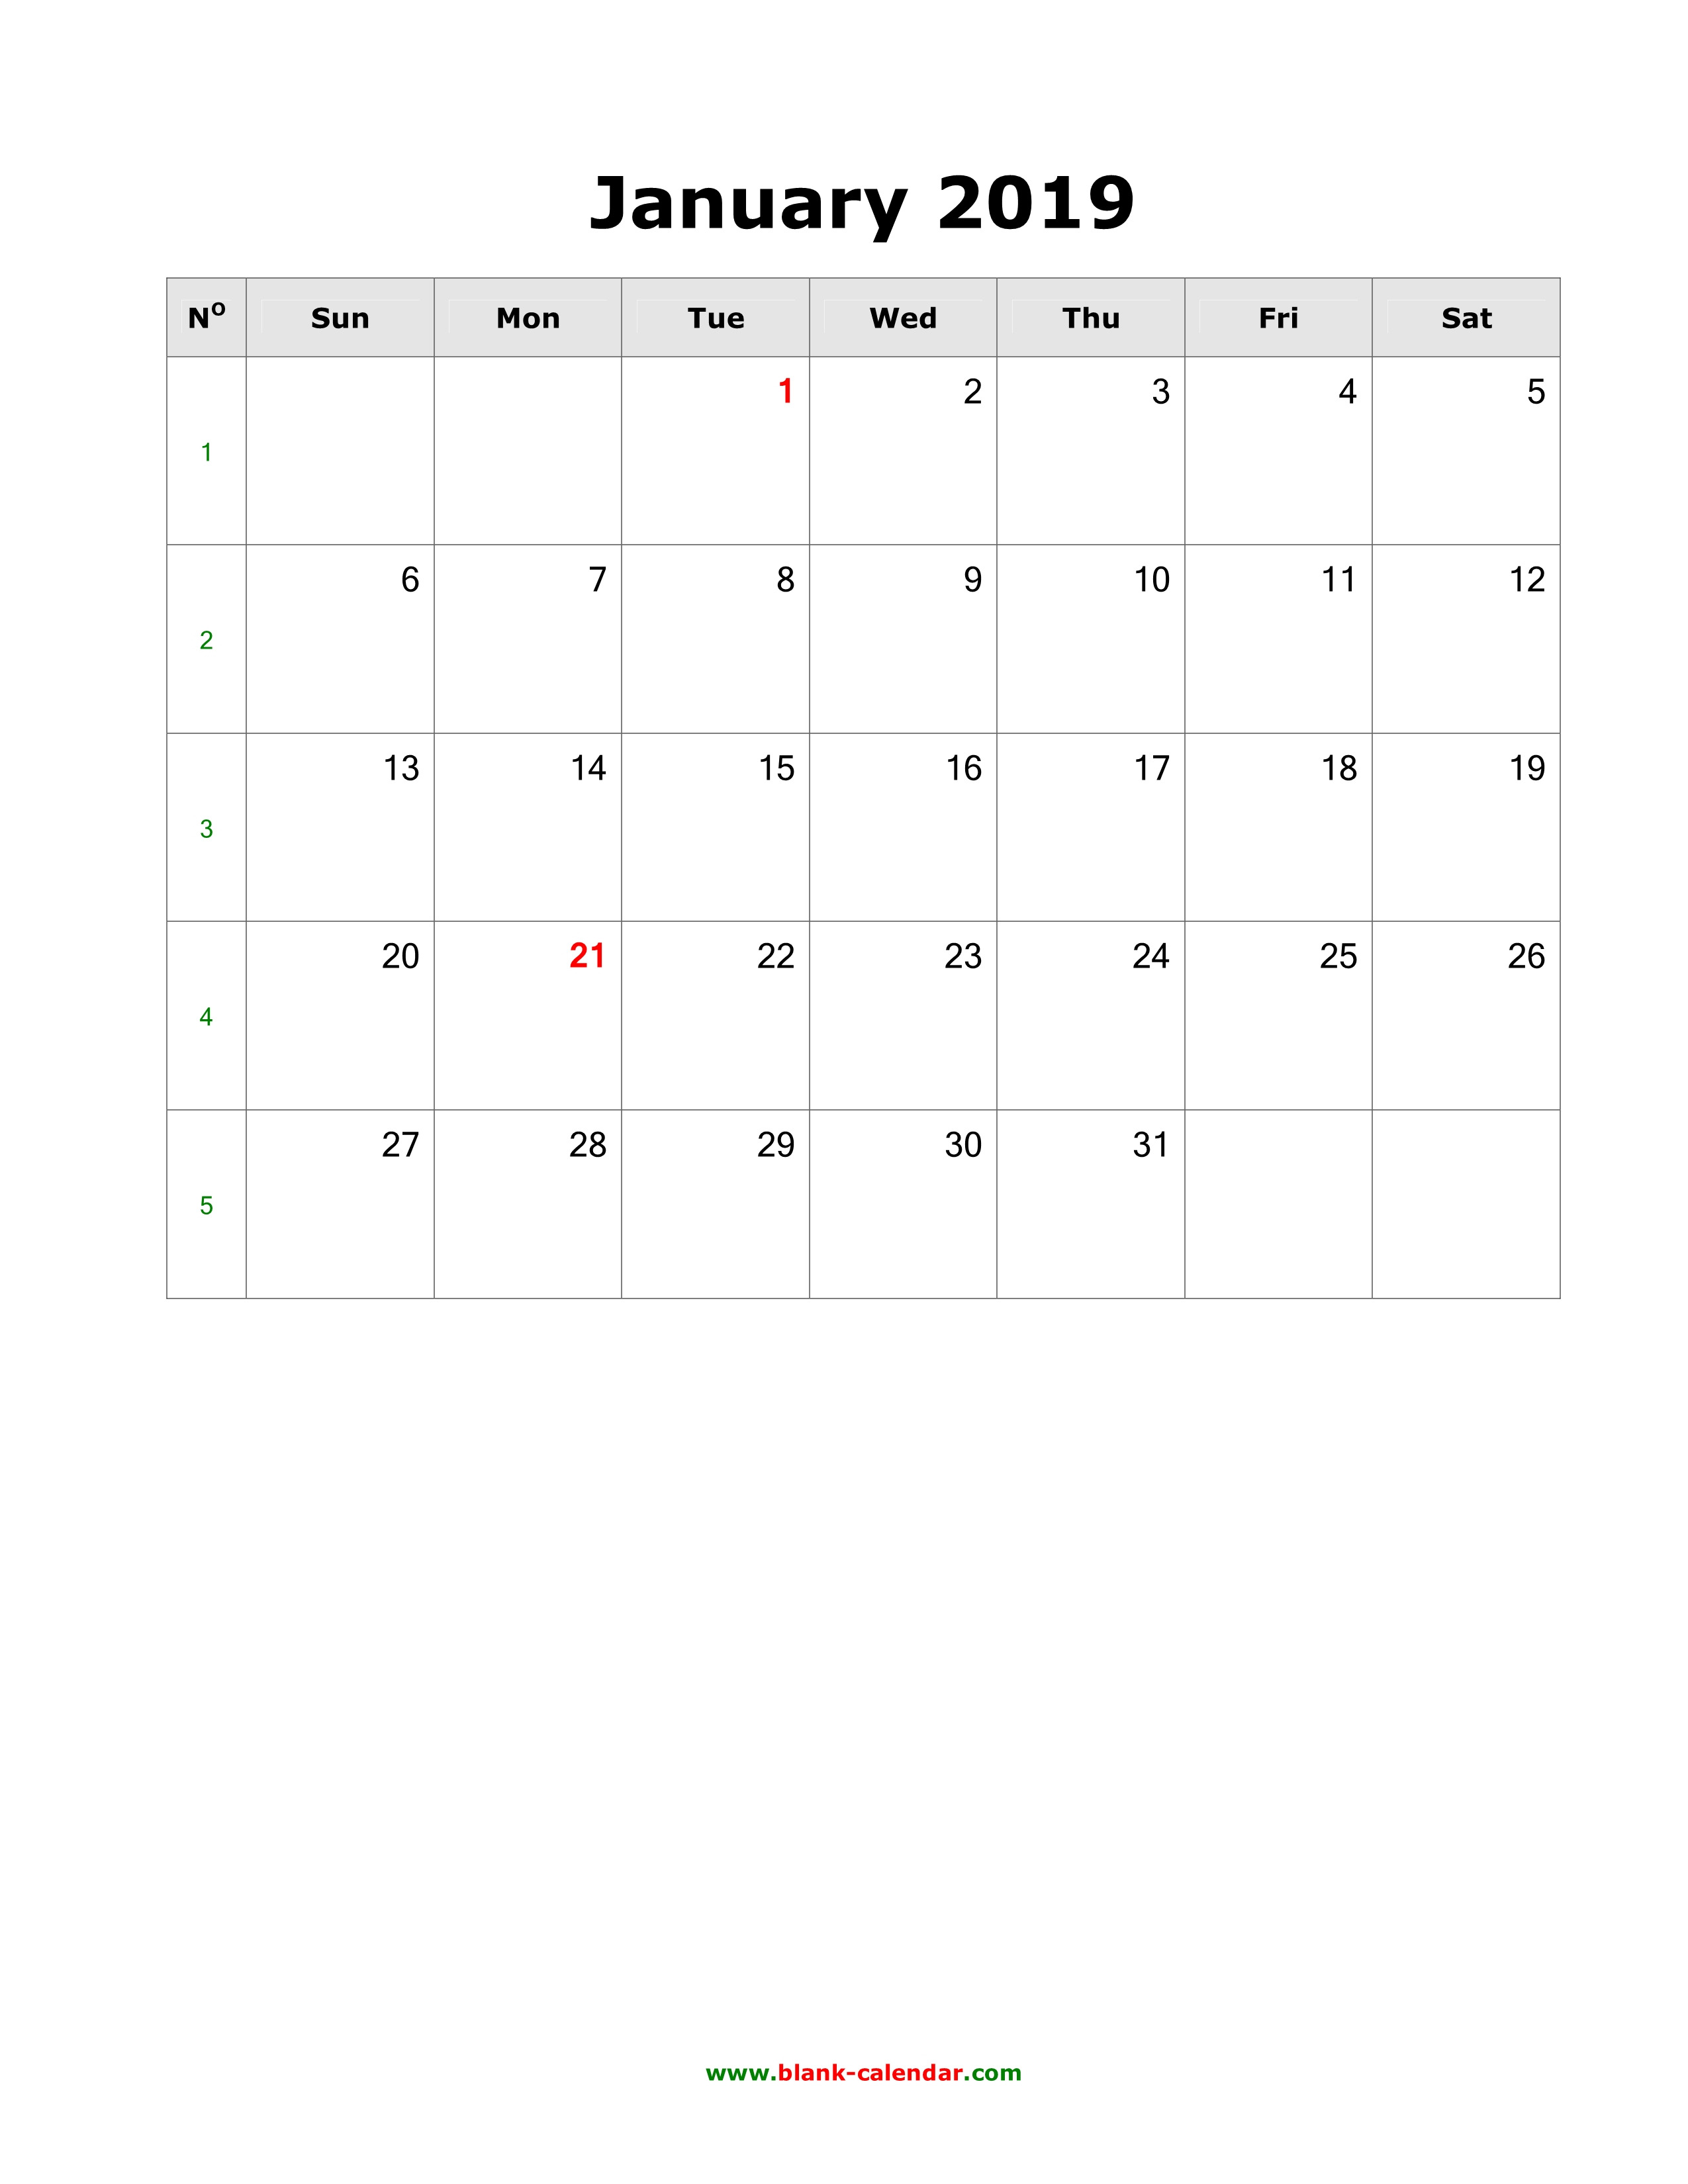 Download Blank Calendar 2019 (12 Pages, One Month Per Page